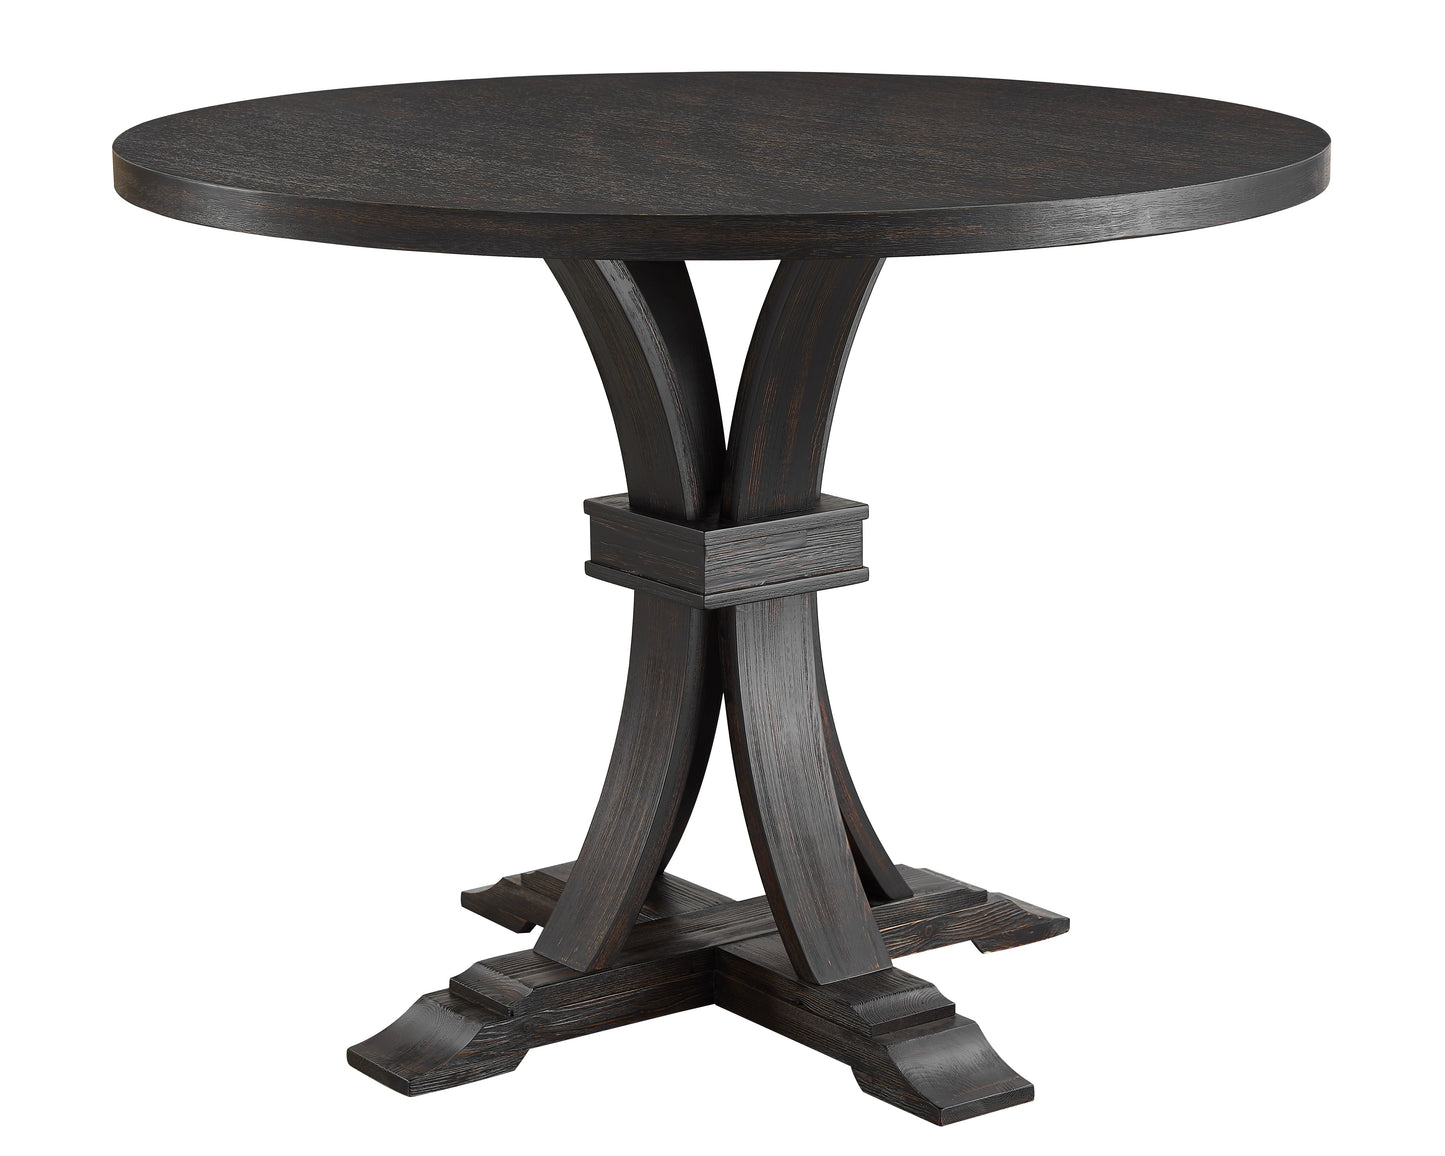 Siena Distressed Black Finish 5-Piece Counter Height Dining set, Pedestal Round Table with Tan Chairs